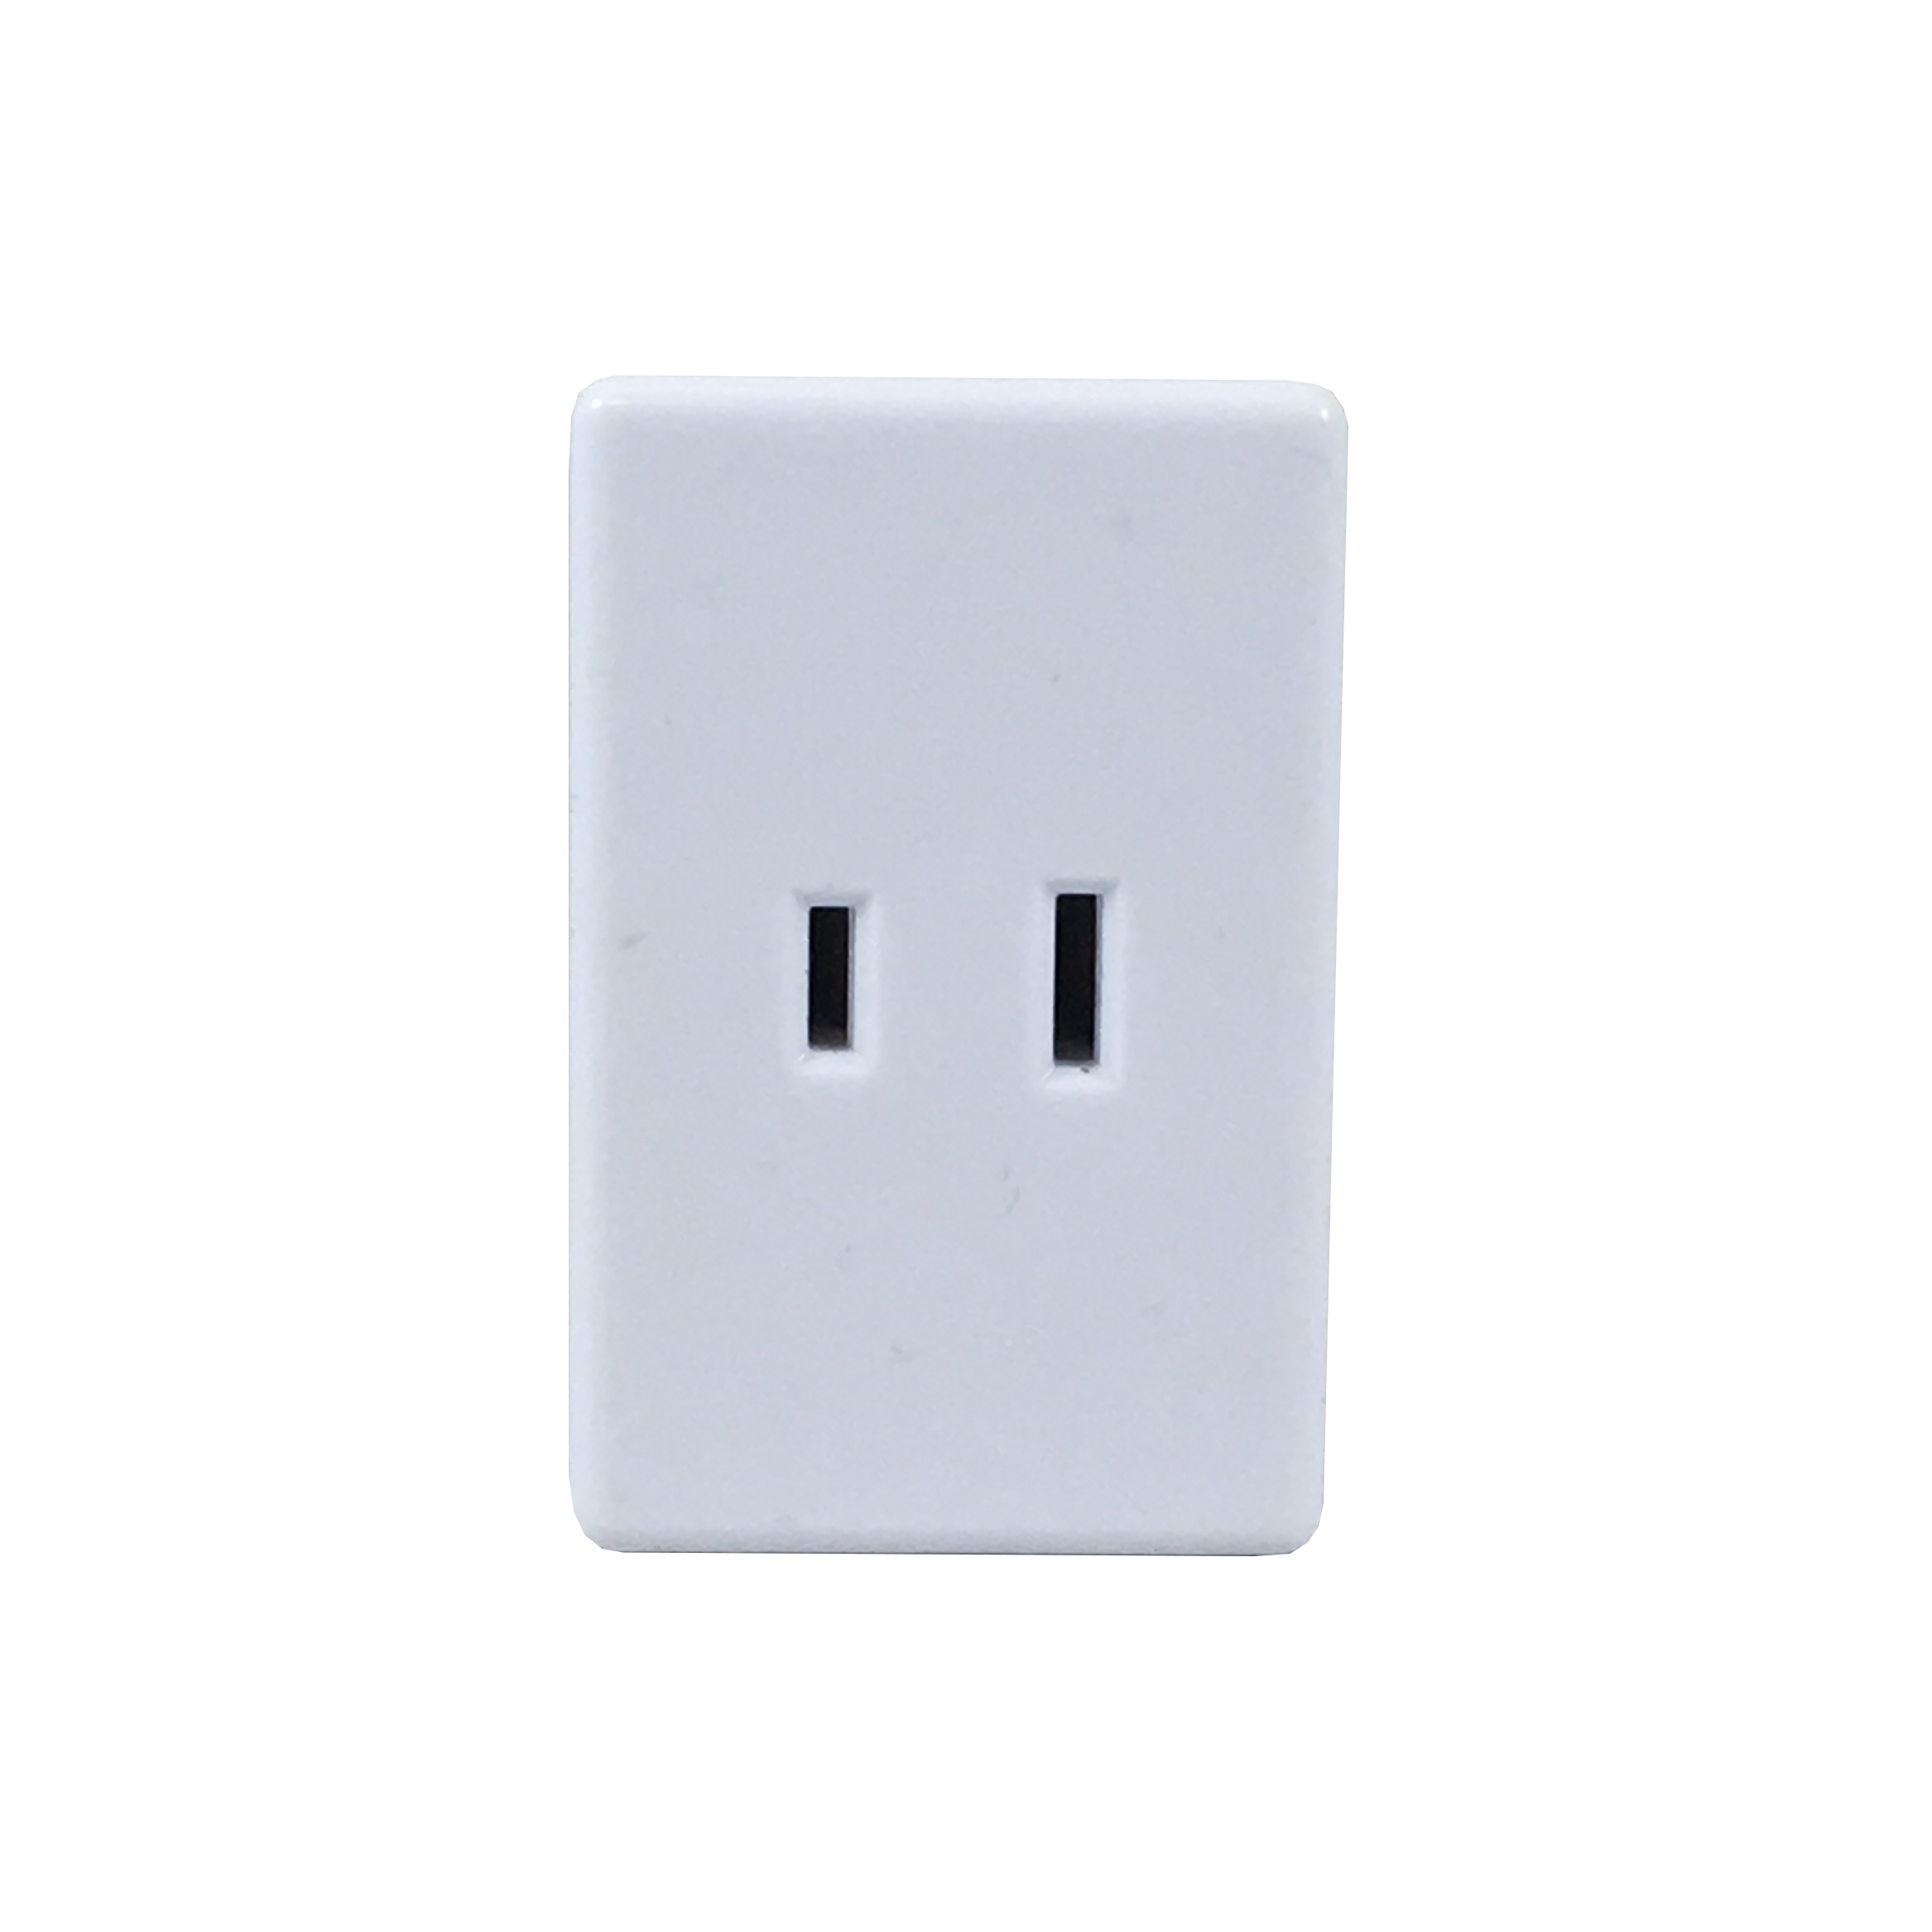 Lamp Dimmer Switch Plug-in 3 Pin UK Socket Converter Variable Current Adaptor 